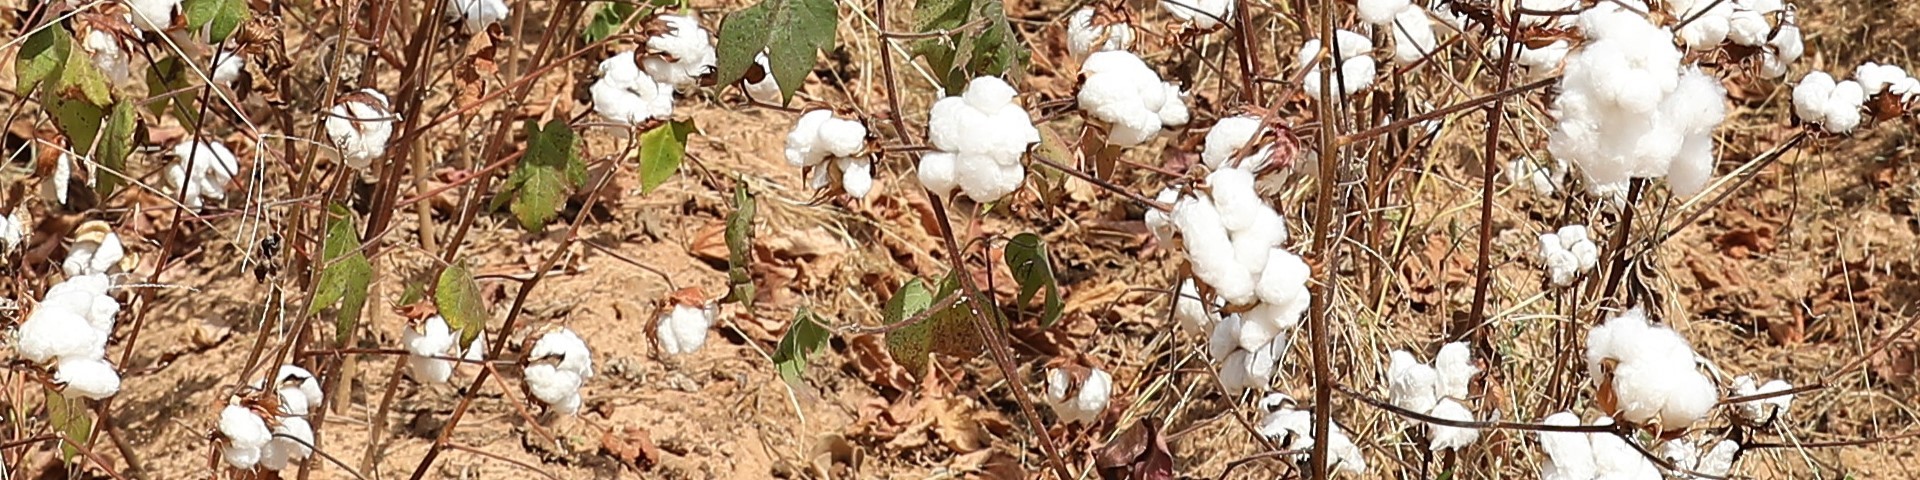 Vibrant cotton plants thriving in a field.